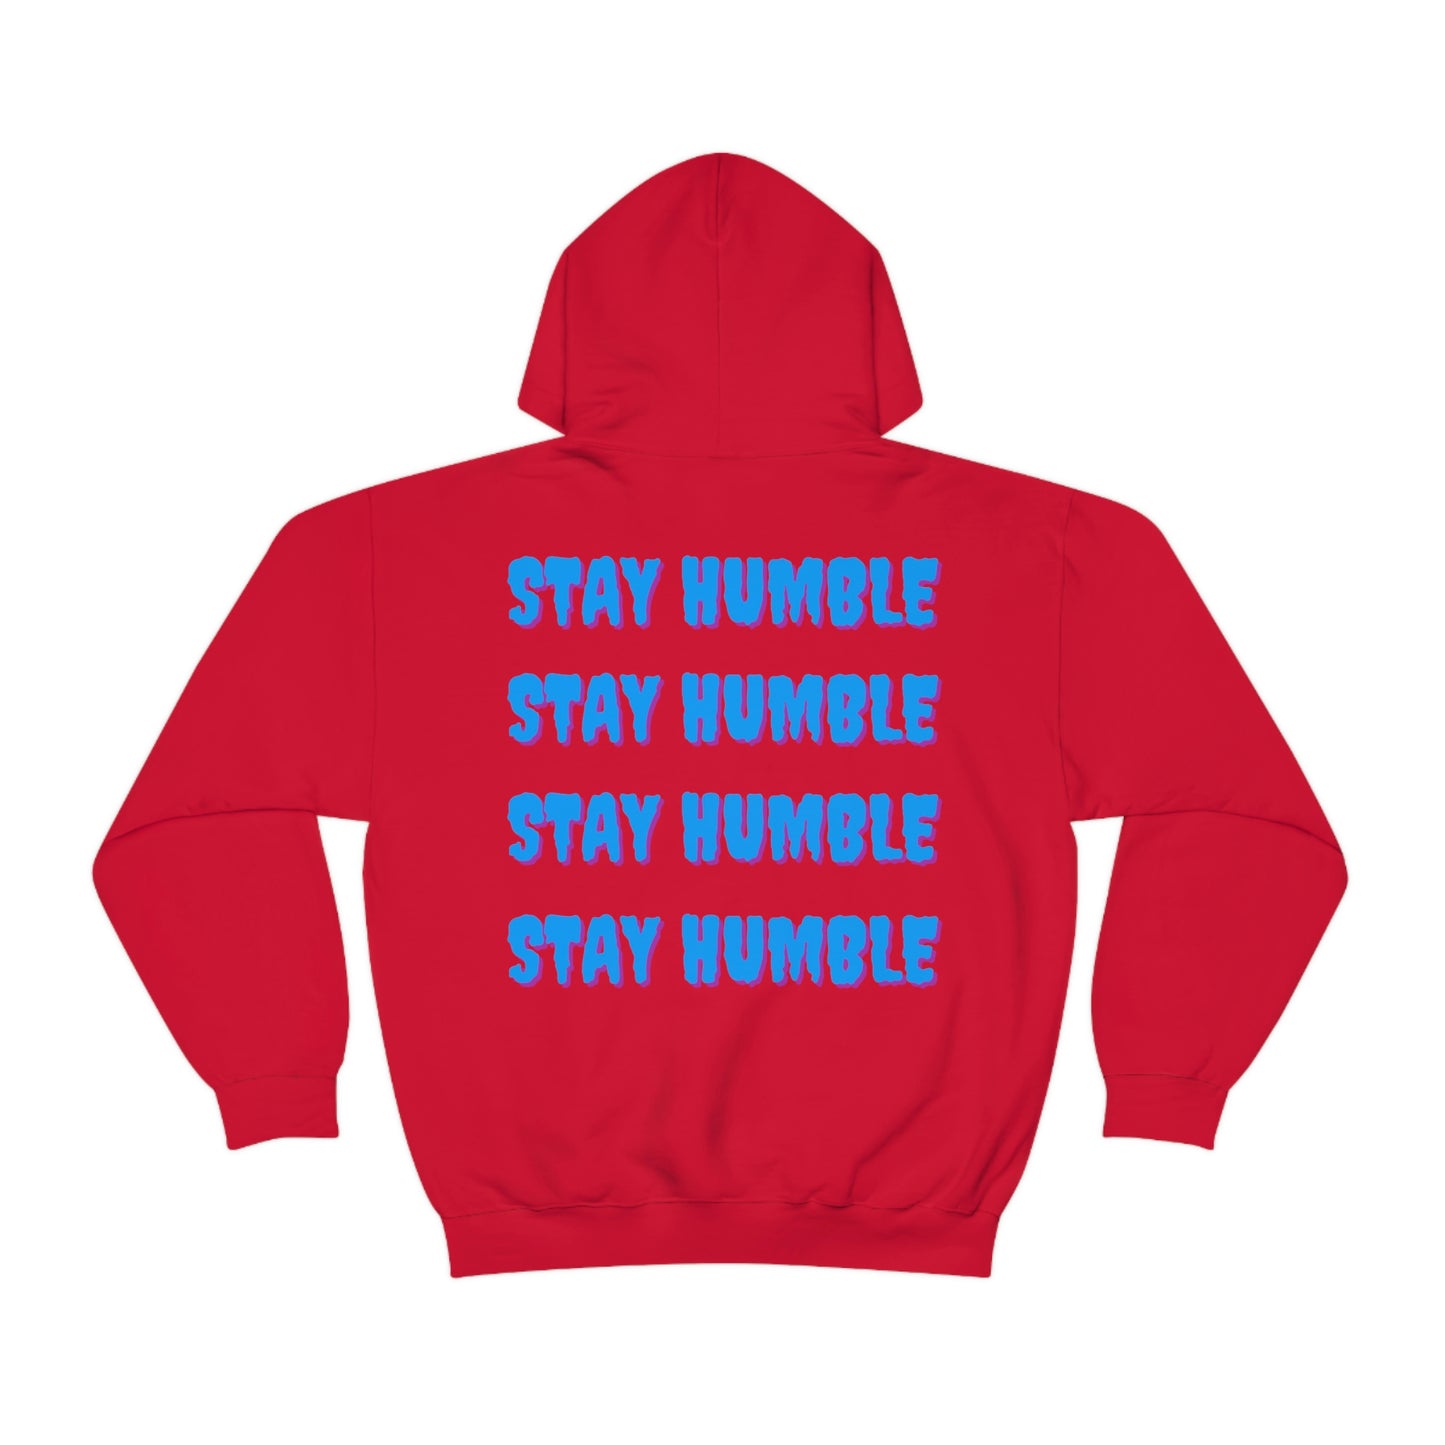 Stay Humble Hoodie - Unisex - Conscious tees inc.